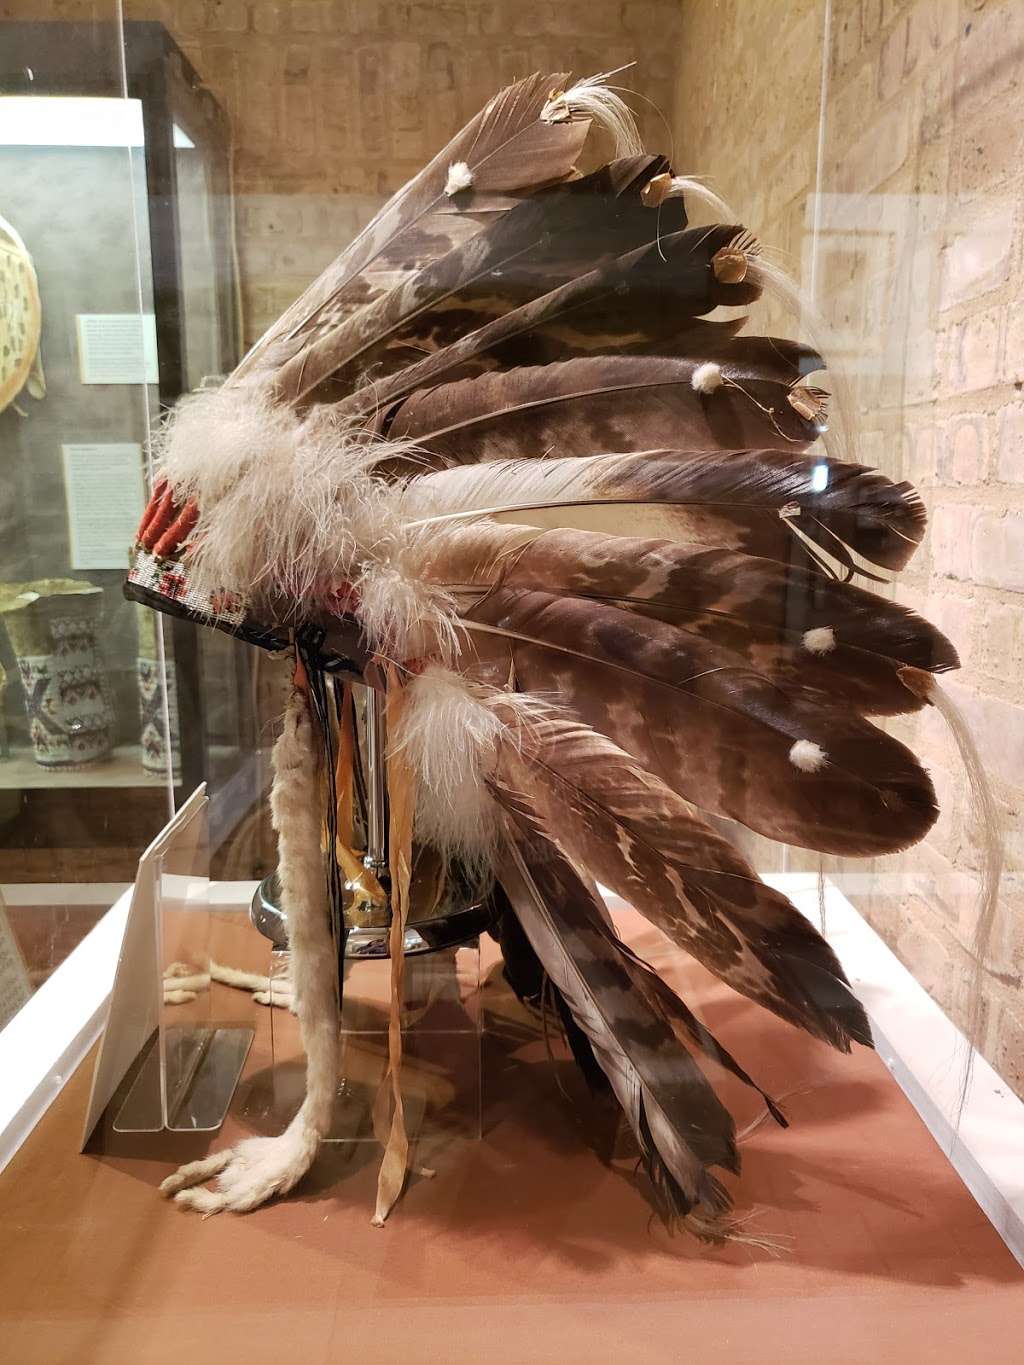 Mitchell Museum of the American Indian | 3001 Central St, Evanston, IL 60201, USA | Phone: (847) 475-1030